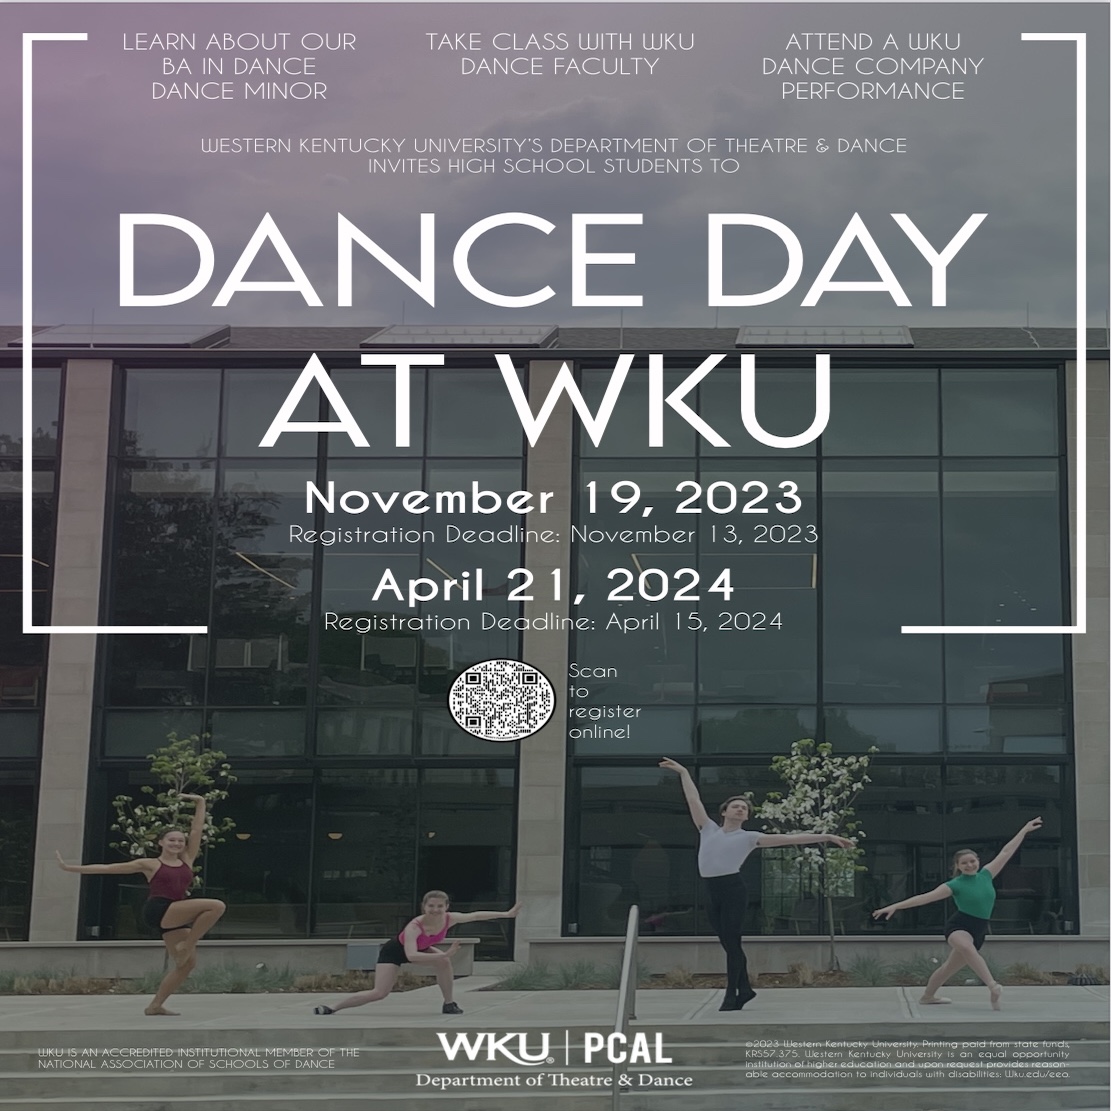 Dancers representing the four genres pose in front of the Commons. Overlaid is text describing the information regarding Dance Day at WKU.